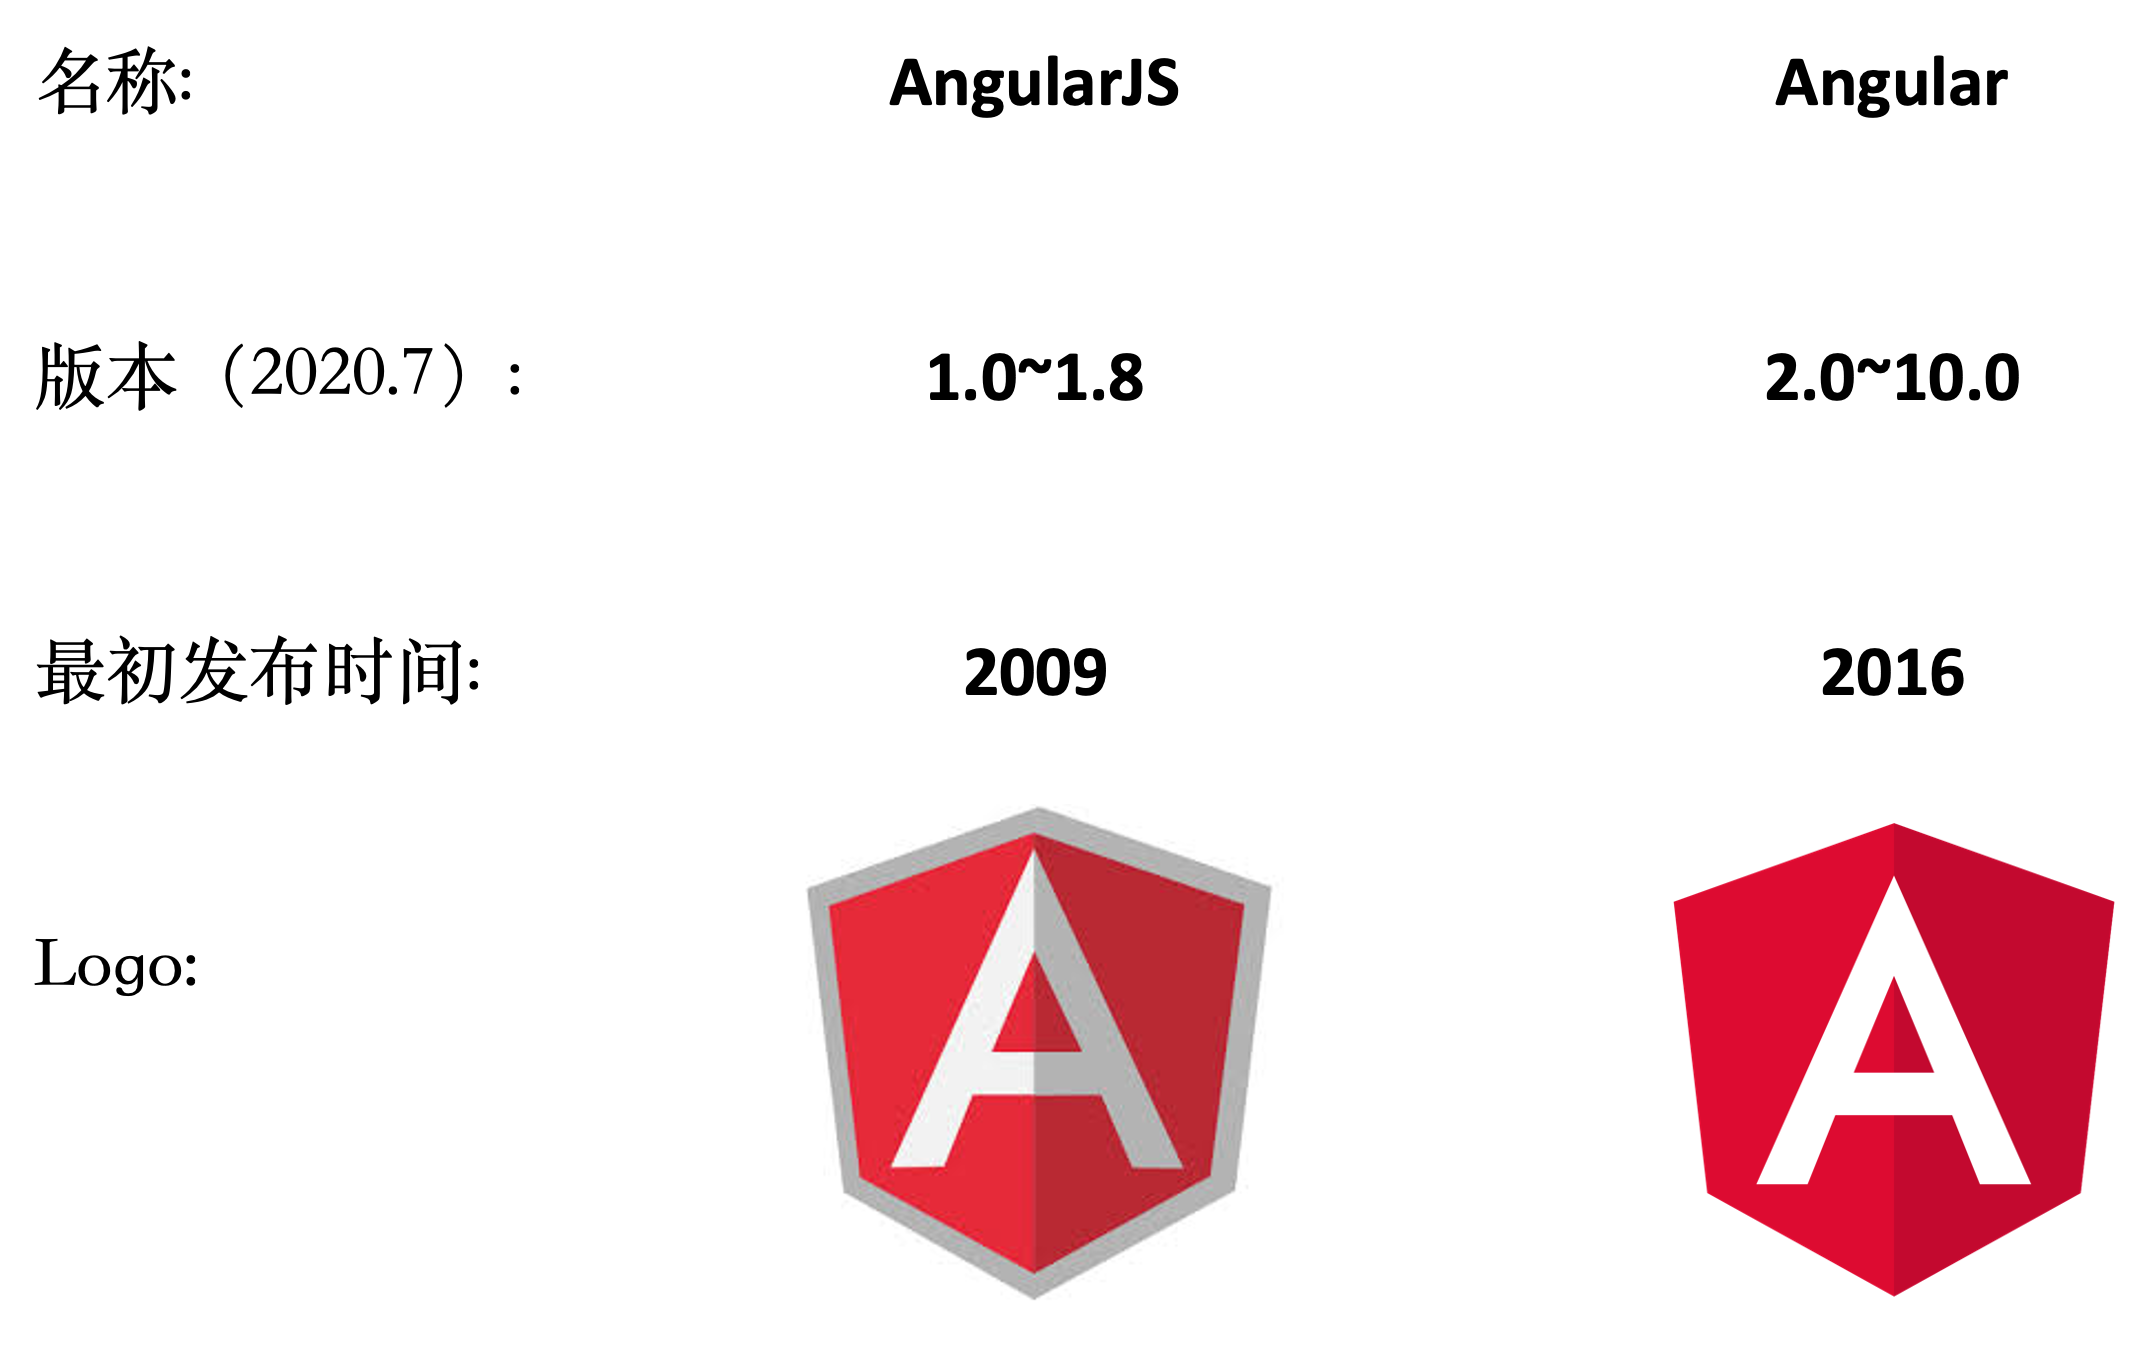 The Basic Elements of AngularJS - Open source for you